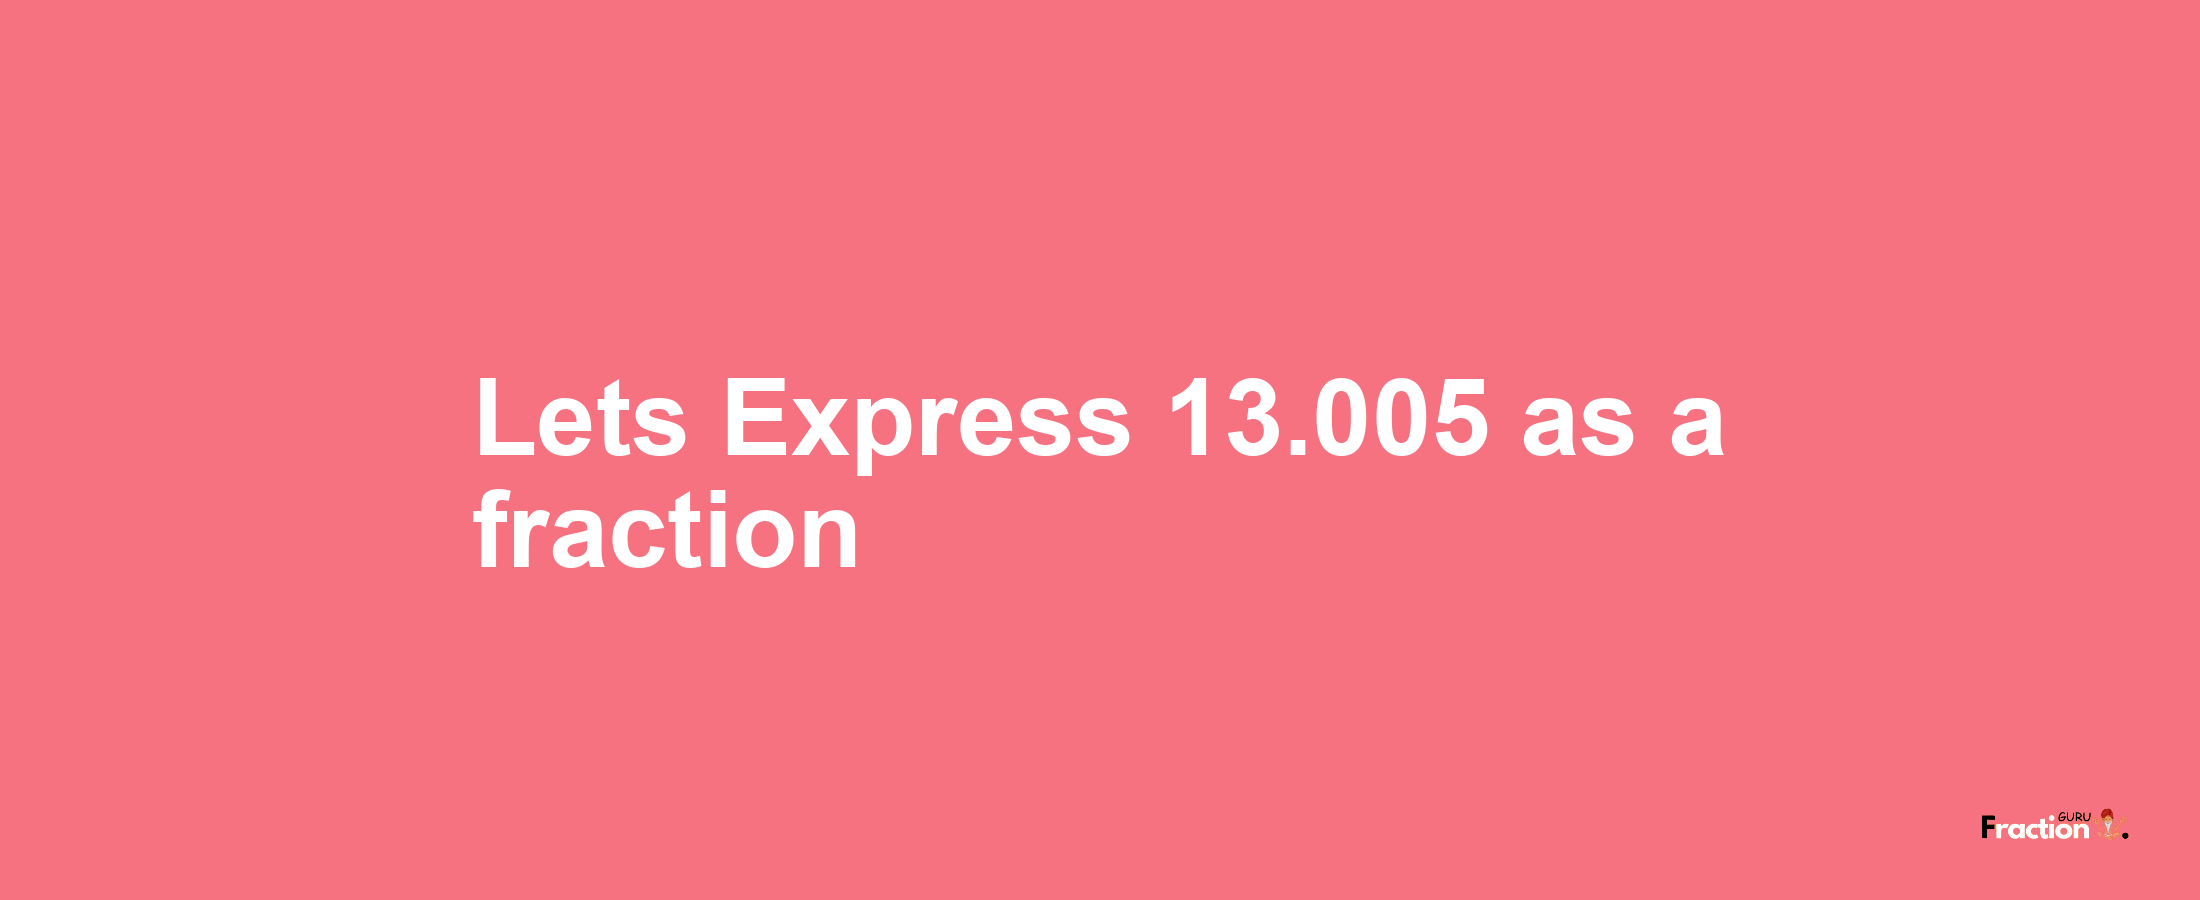 Lets Express 13.005 as afraction